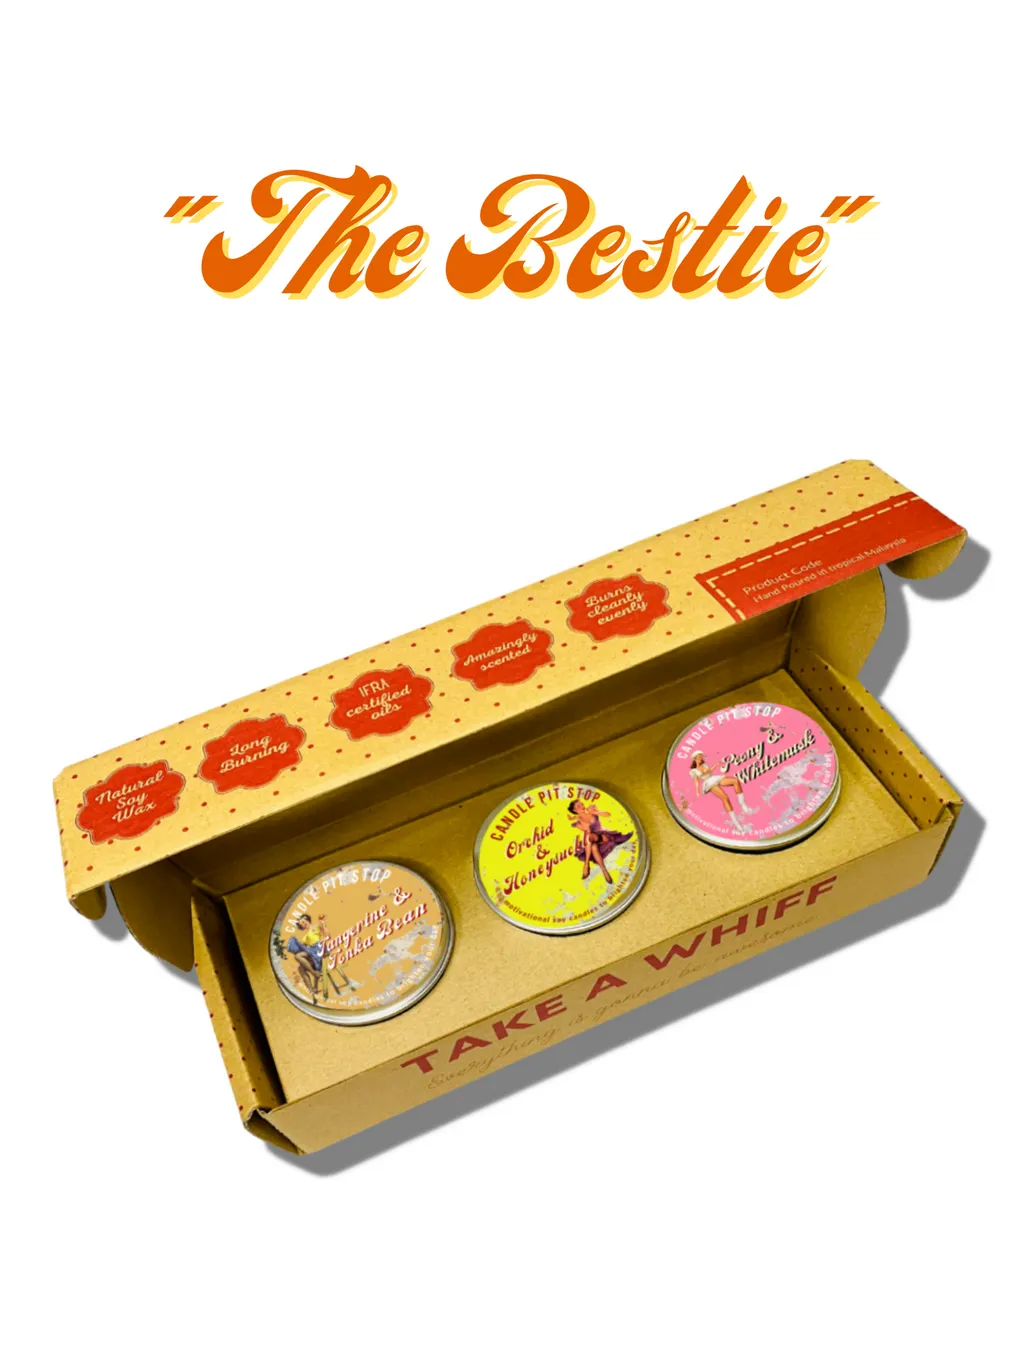 "The Bestie" - Set Of 3 Travel Candles